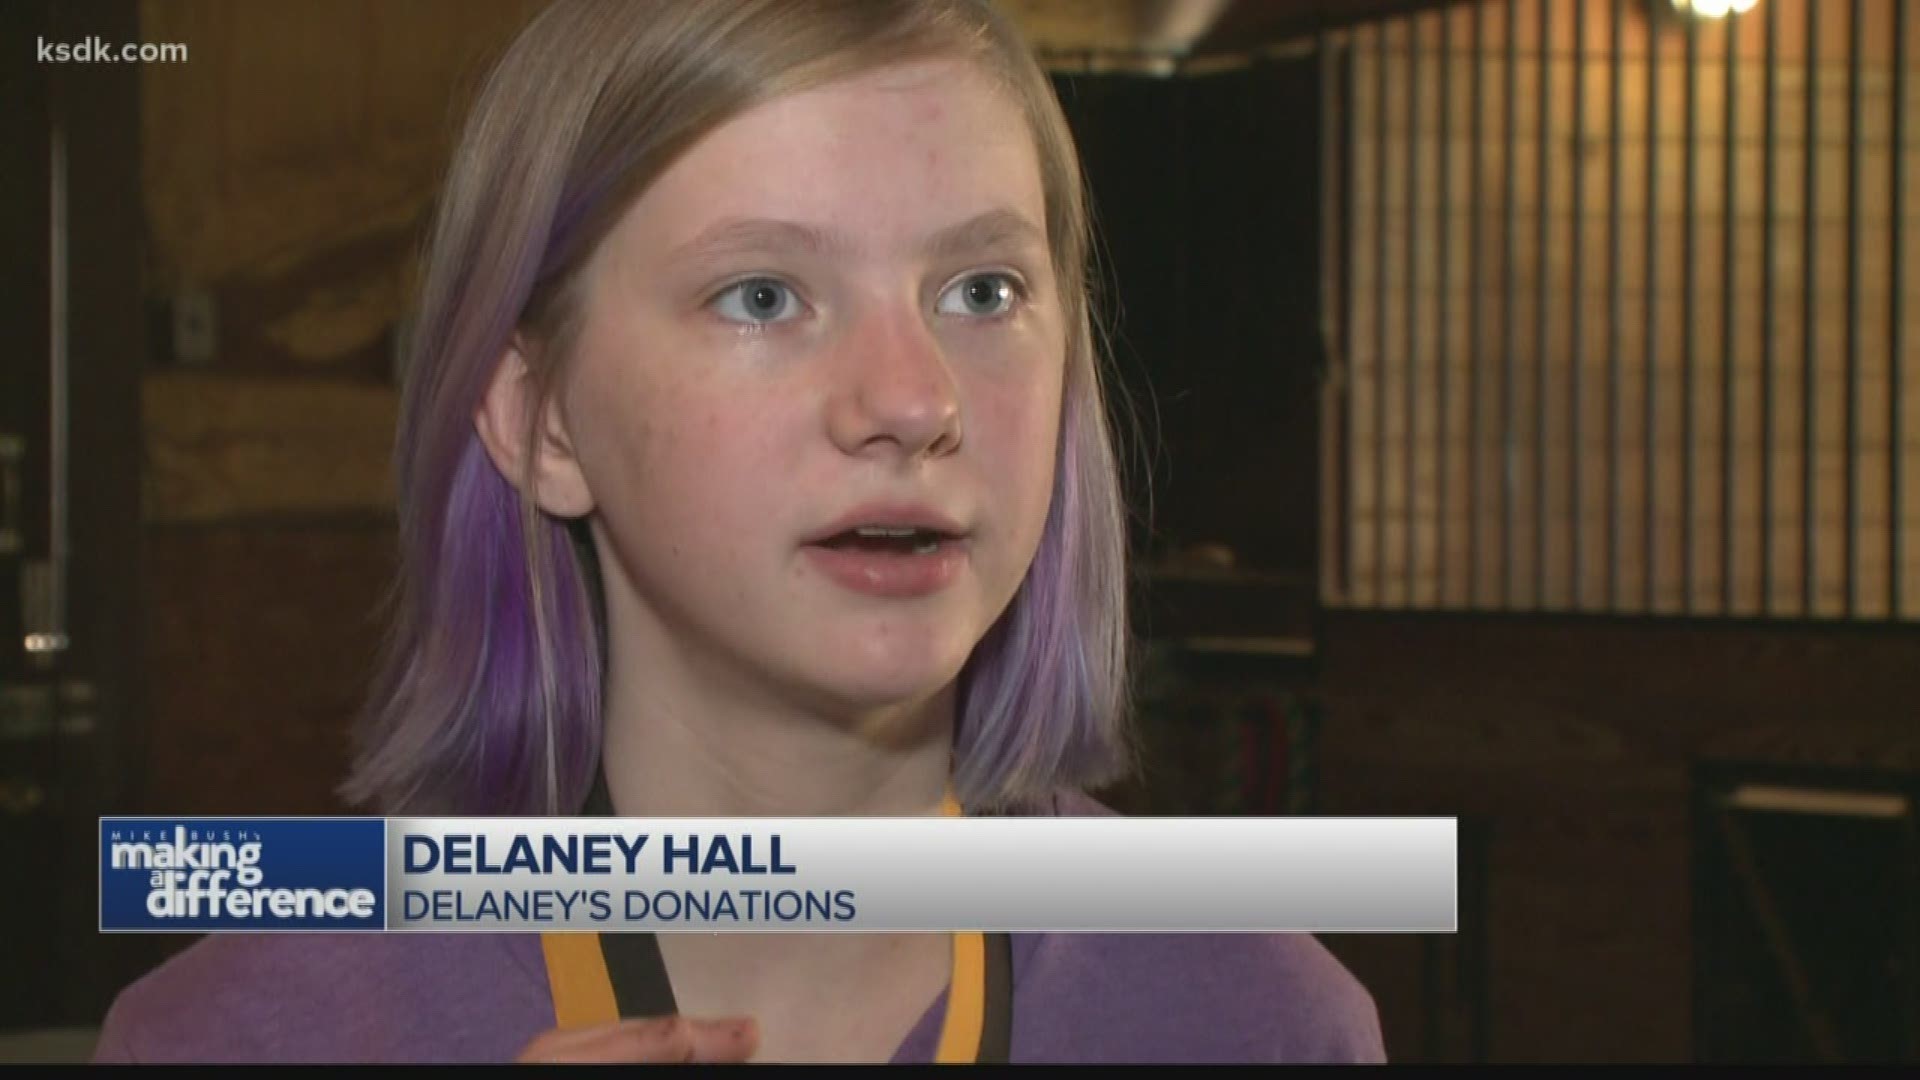 Delaney has never asked for anything in return, but she recently got a packet in the mail from the The Prudential Spirit of Community Awards, a program that recognizes young people for their community service.